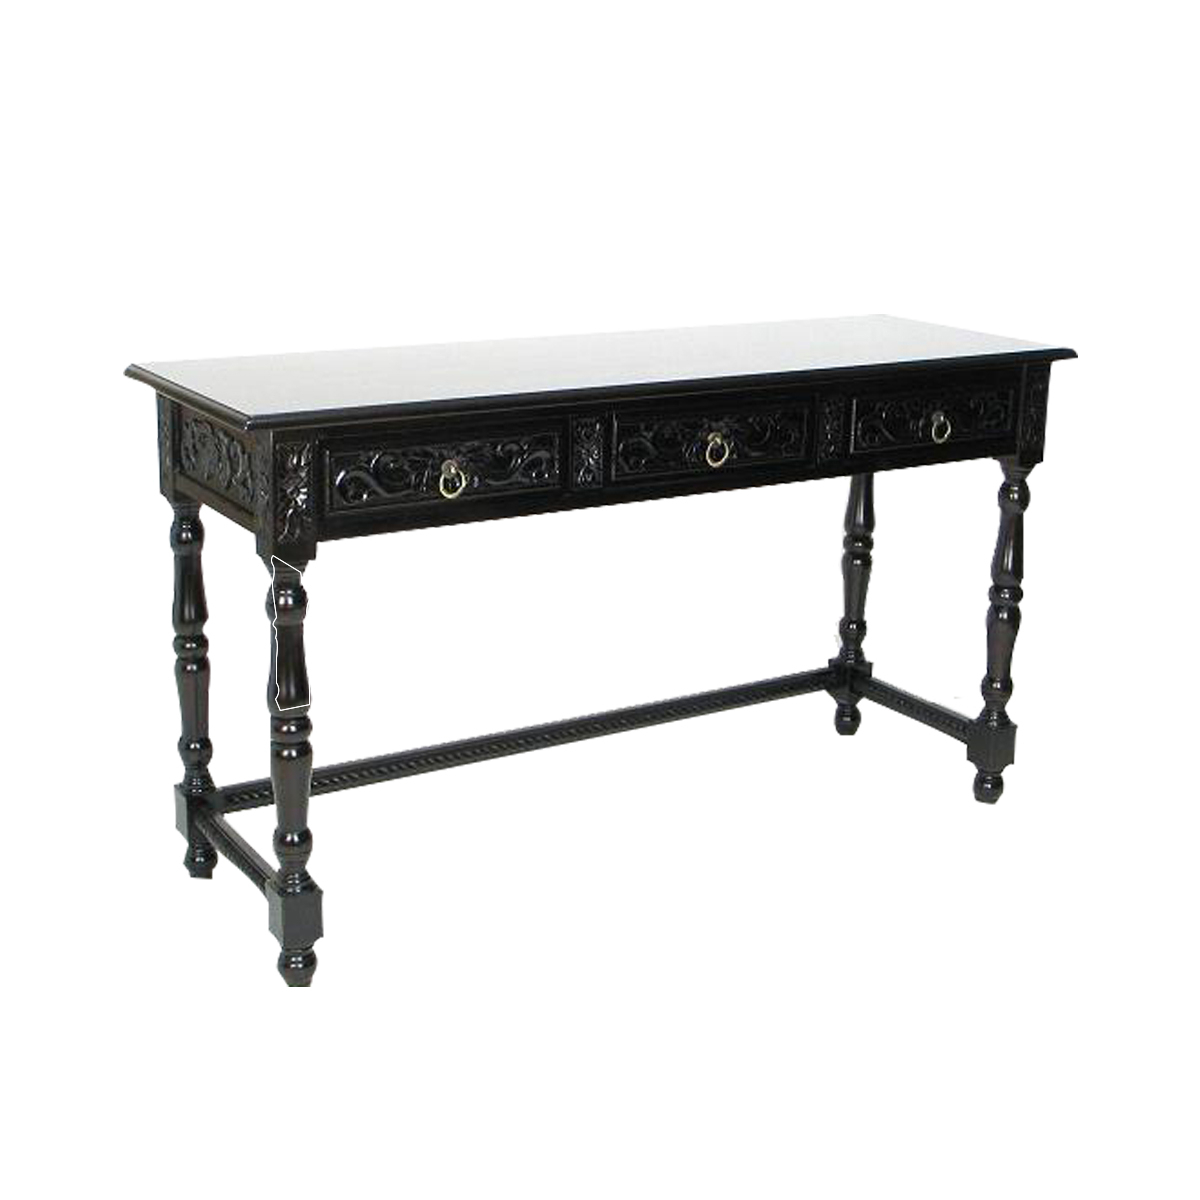 Wooden Console Table With Carved Details And Turned Legs, Black- Saltoro Sherpi